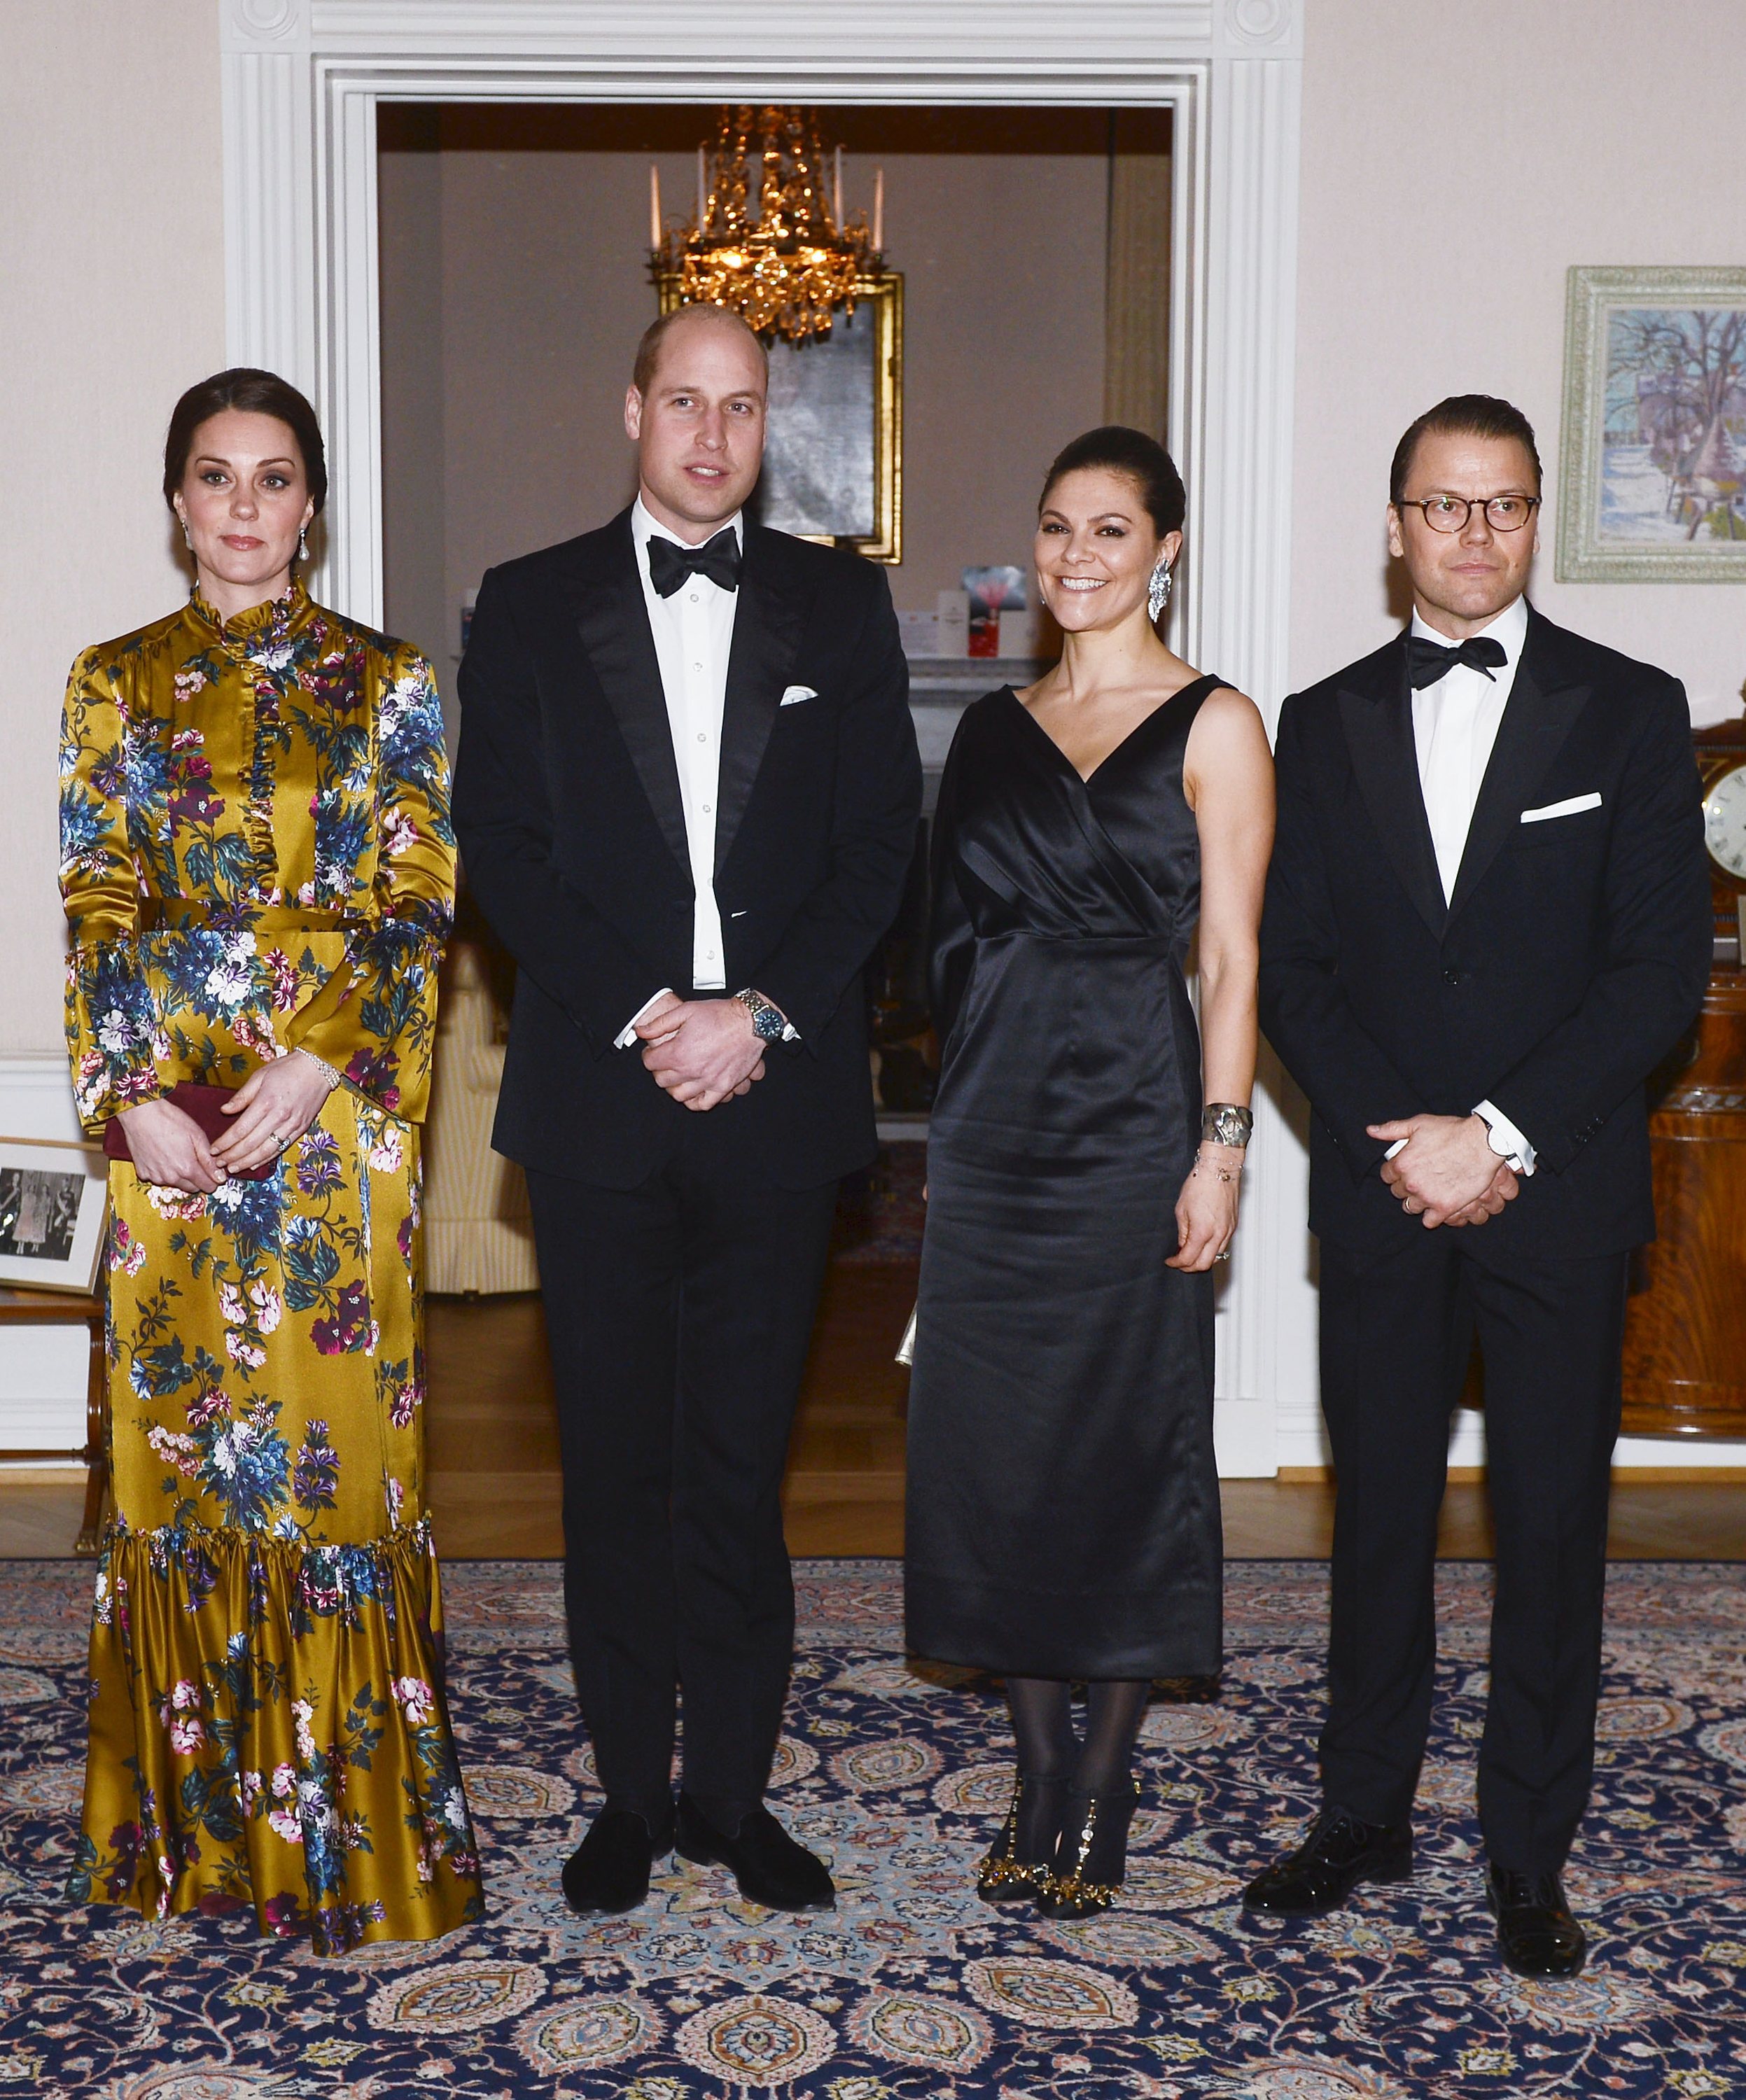 The Duke And Duchess Of Cambridge Visit Sweden And Norway - Day 1